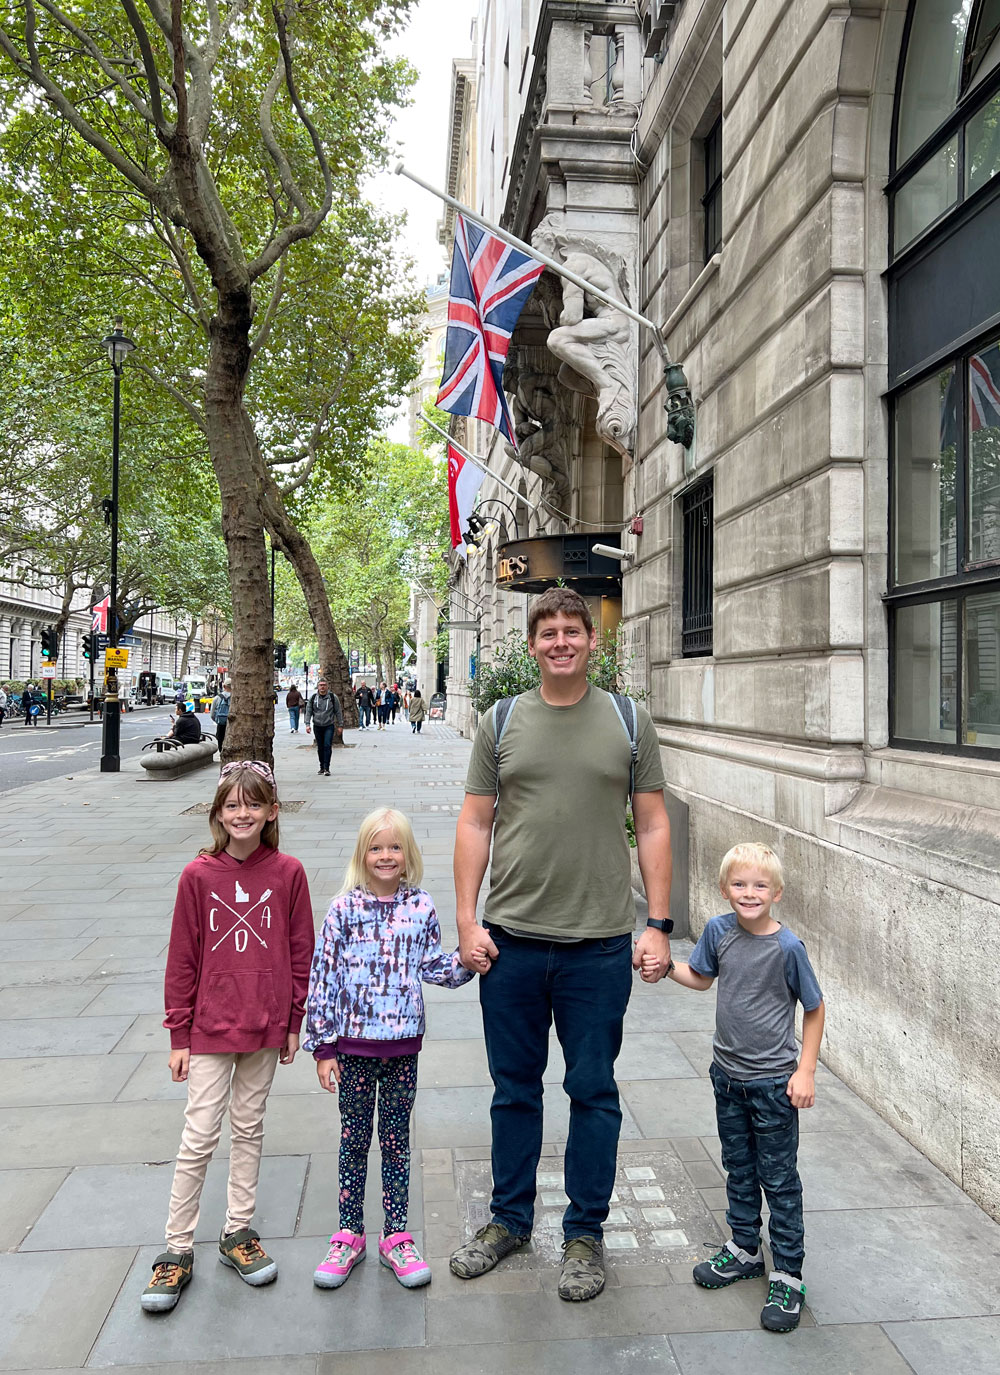 Andy and kids in London, England